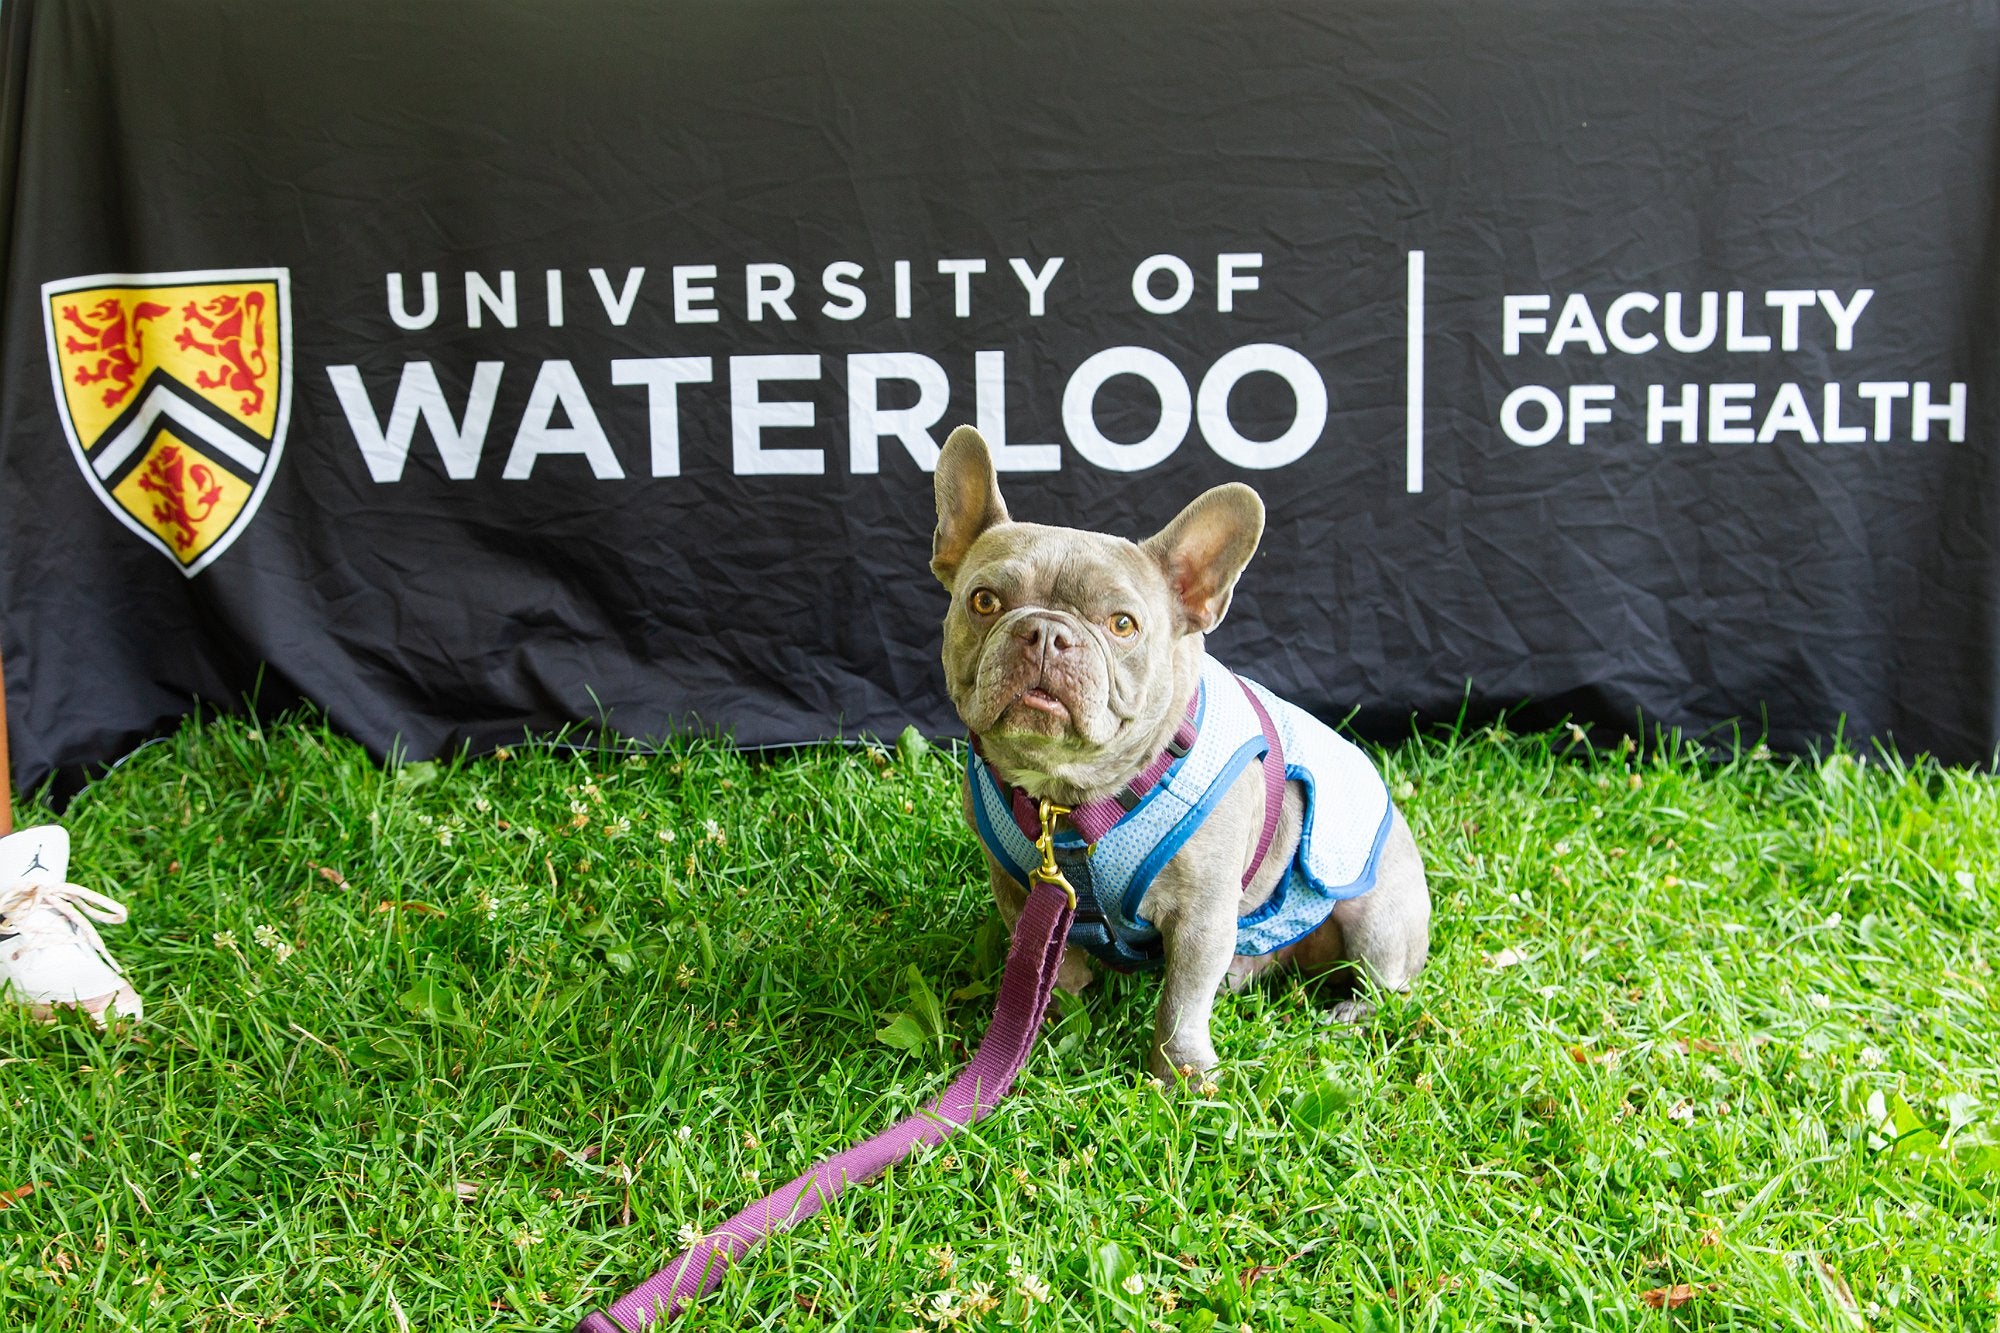 A french bull dog posing in front of the Faculty of Health tablecloth